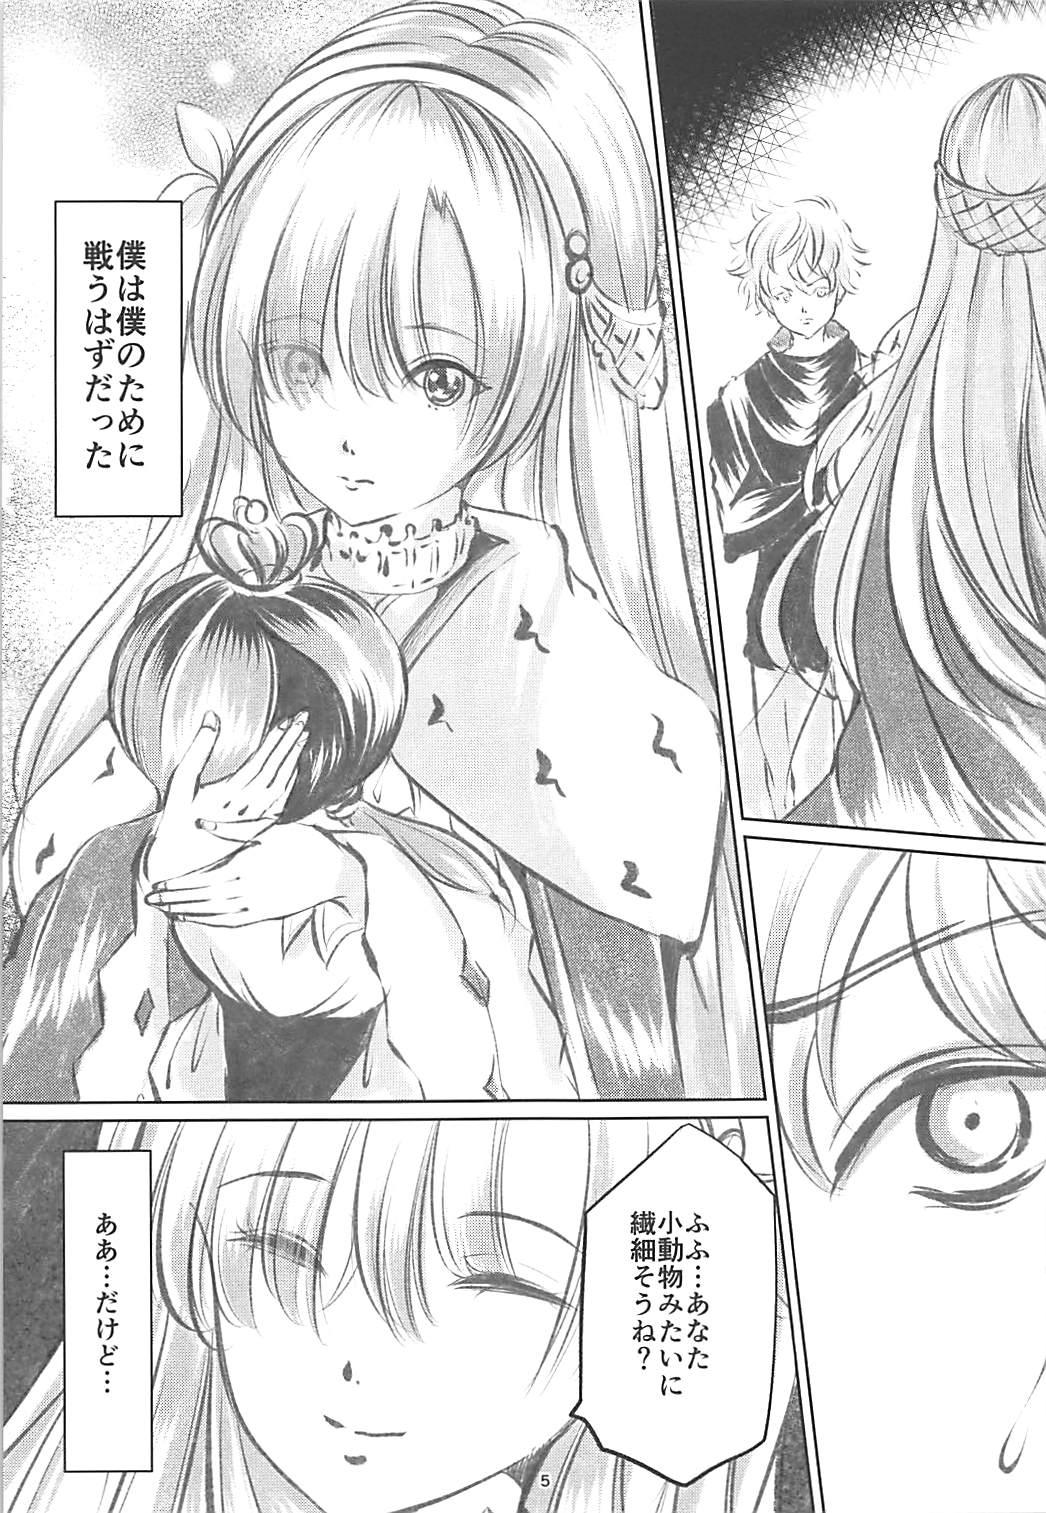 Pissing Anastasia no Yume - Fate grand order Sexcam - Page 4